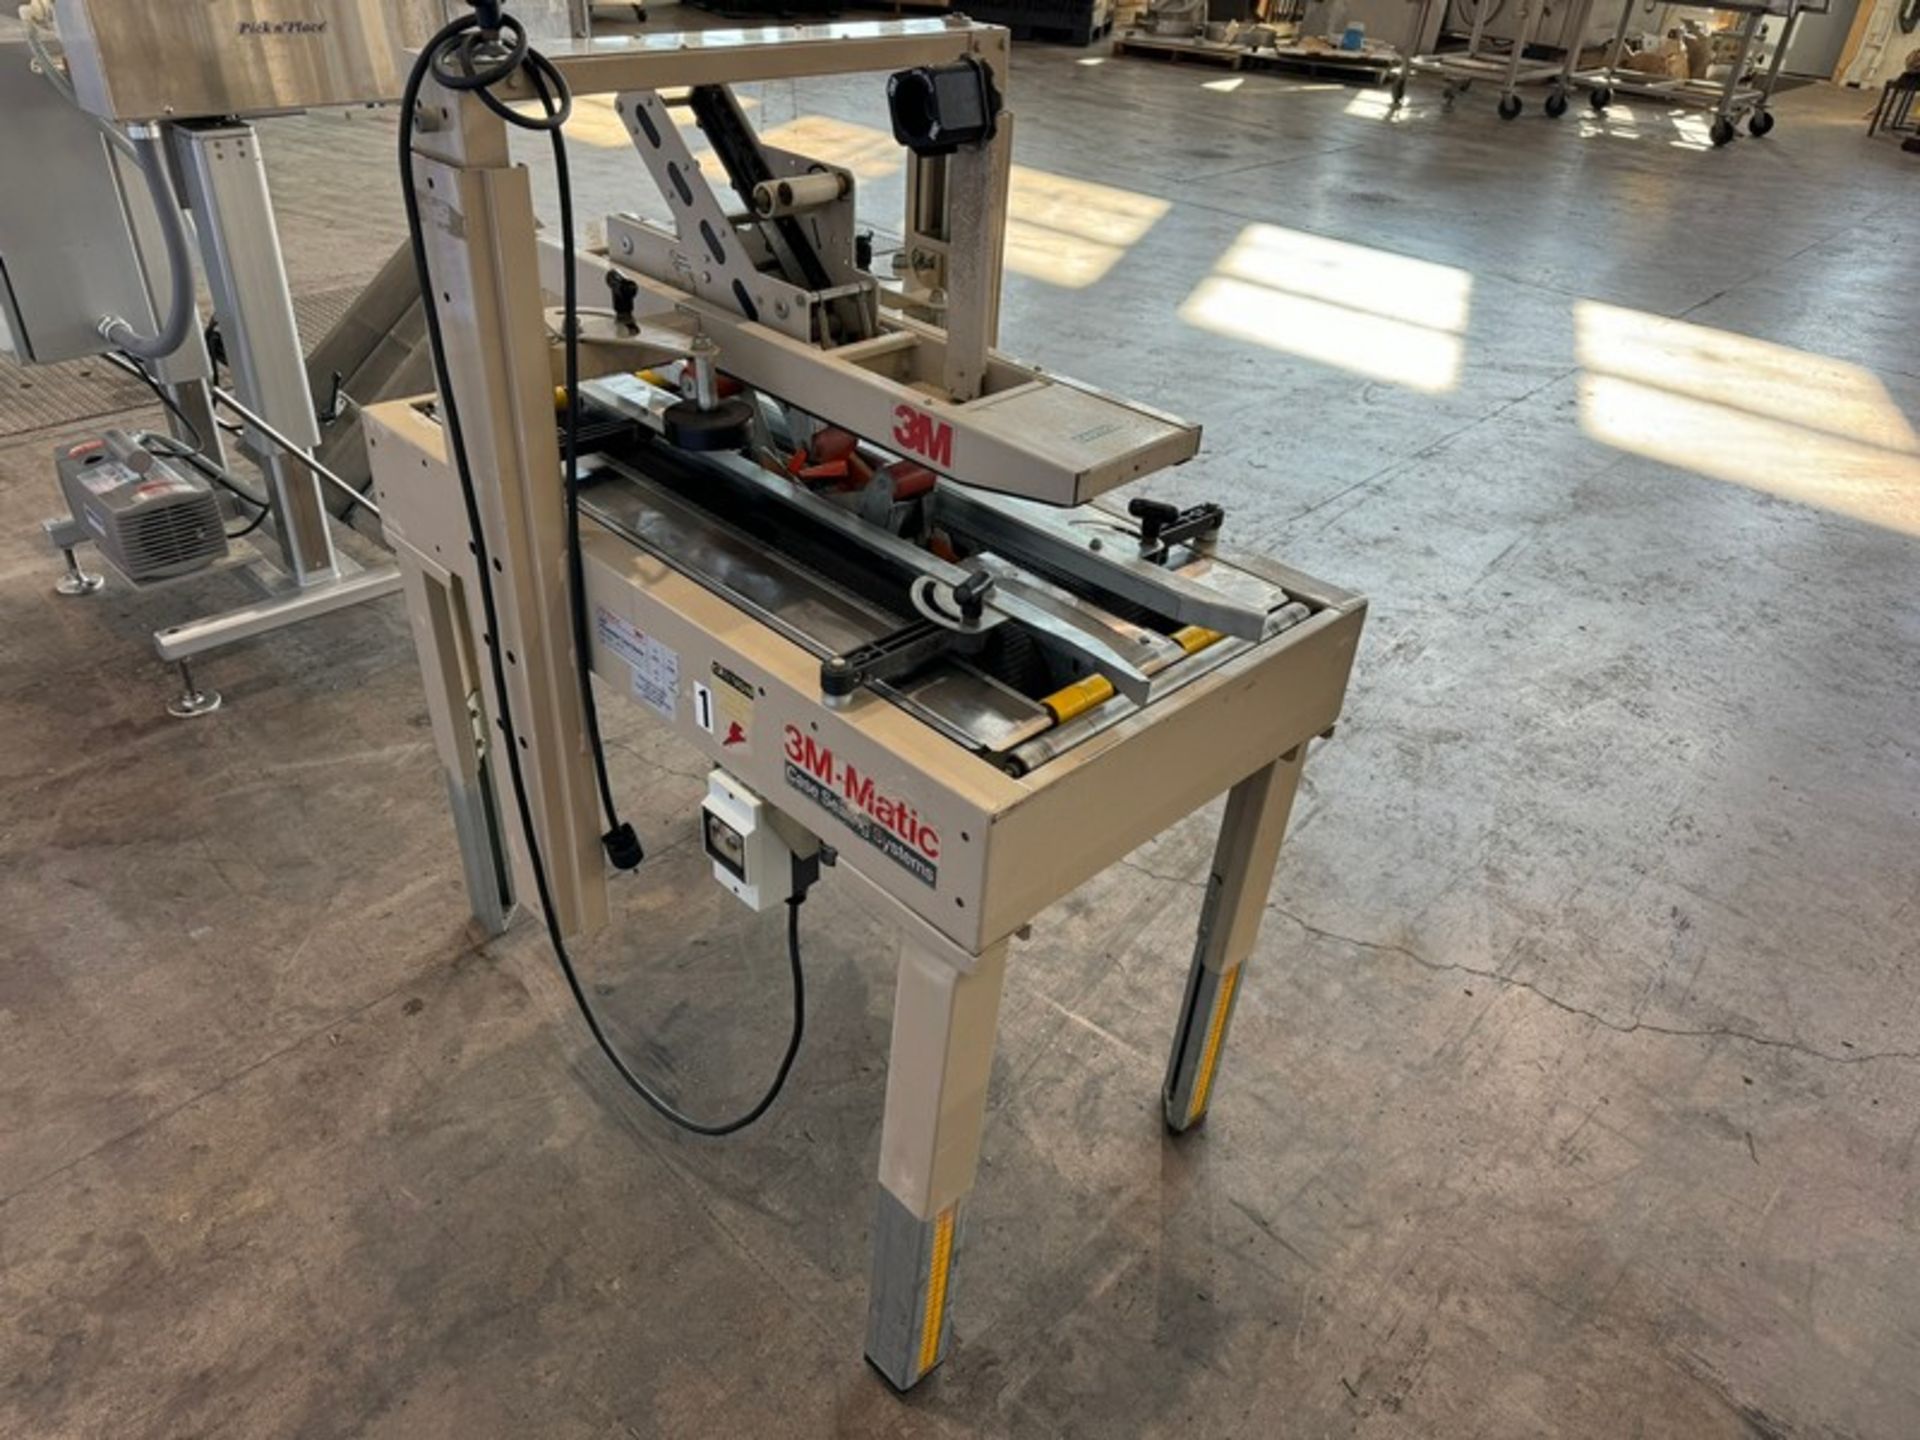 3M-Matic Top & Bottom Adjustable Case Sealer, M/N 28600, S/N 8519, 115 Volts, with Top & Bottom Tape - Image 6 of 6